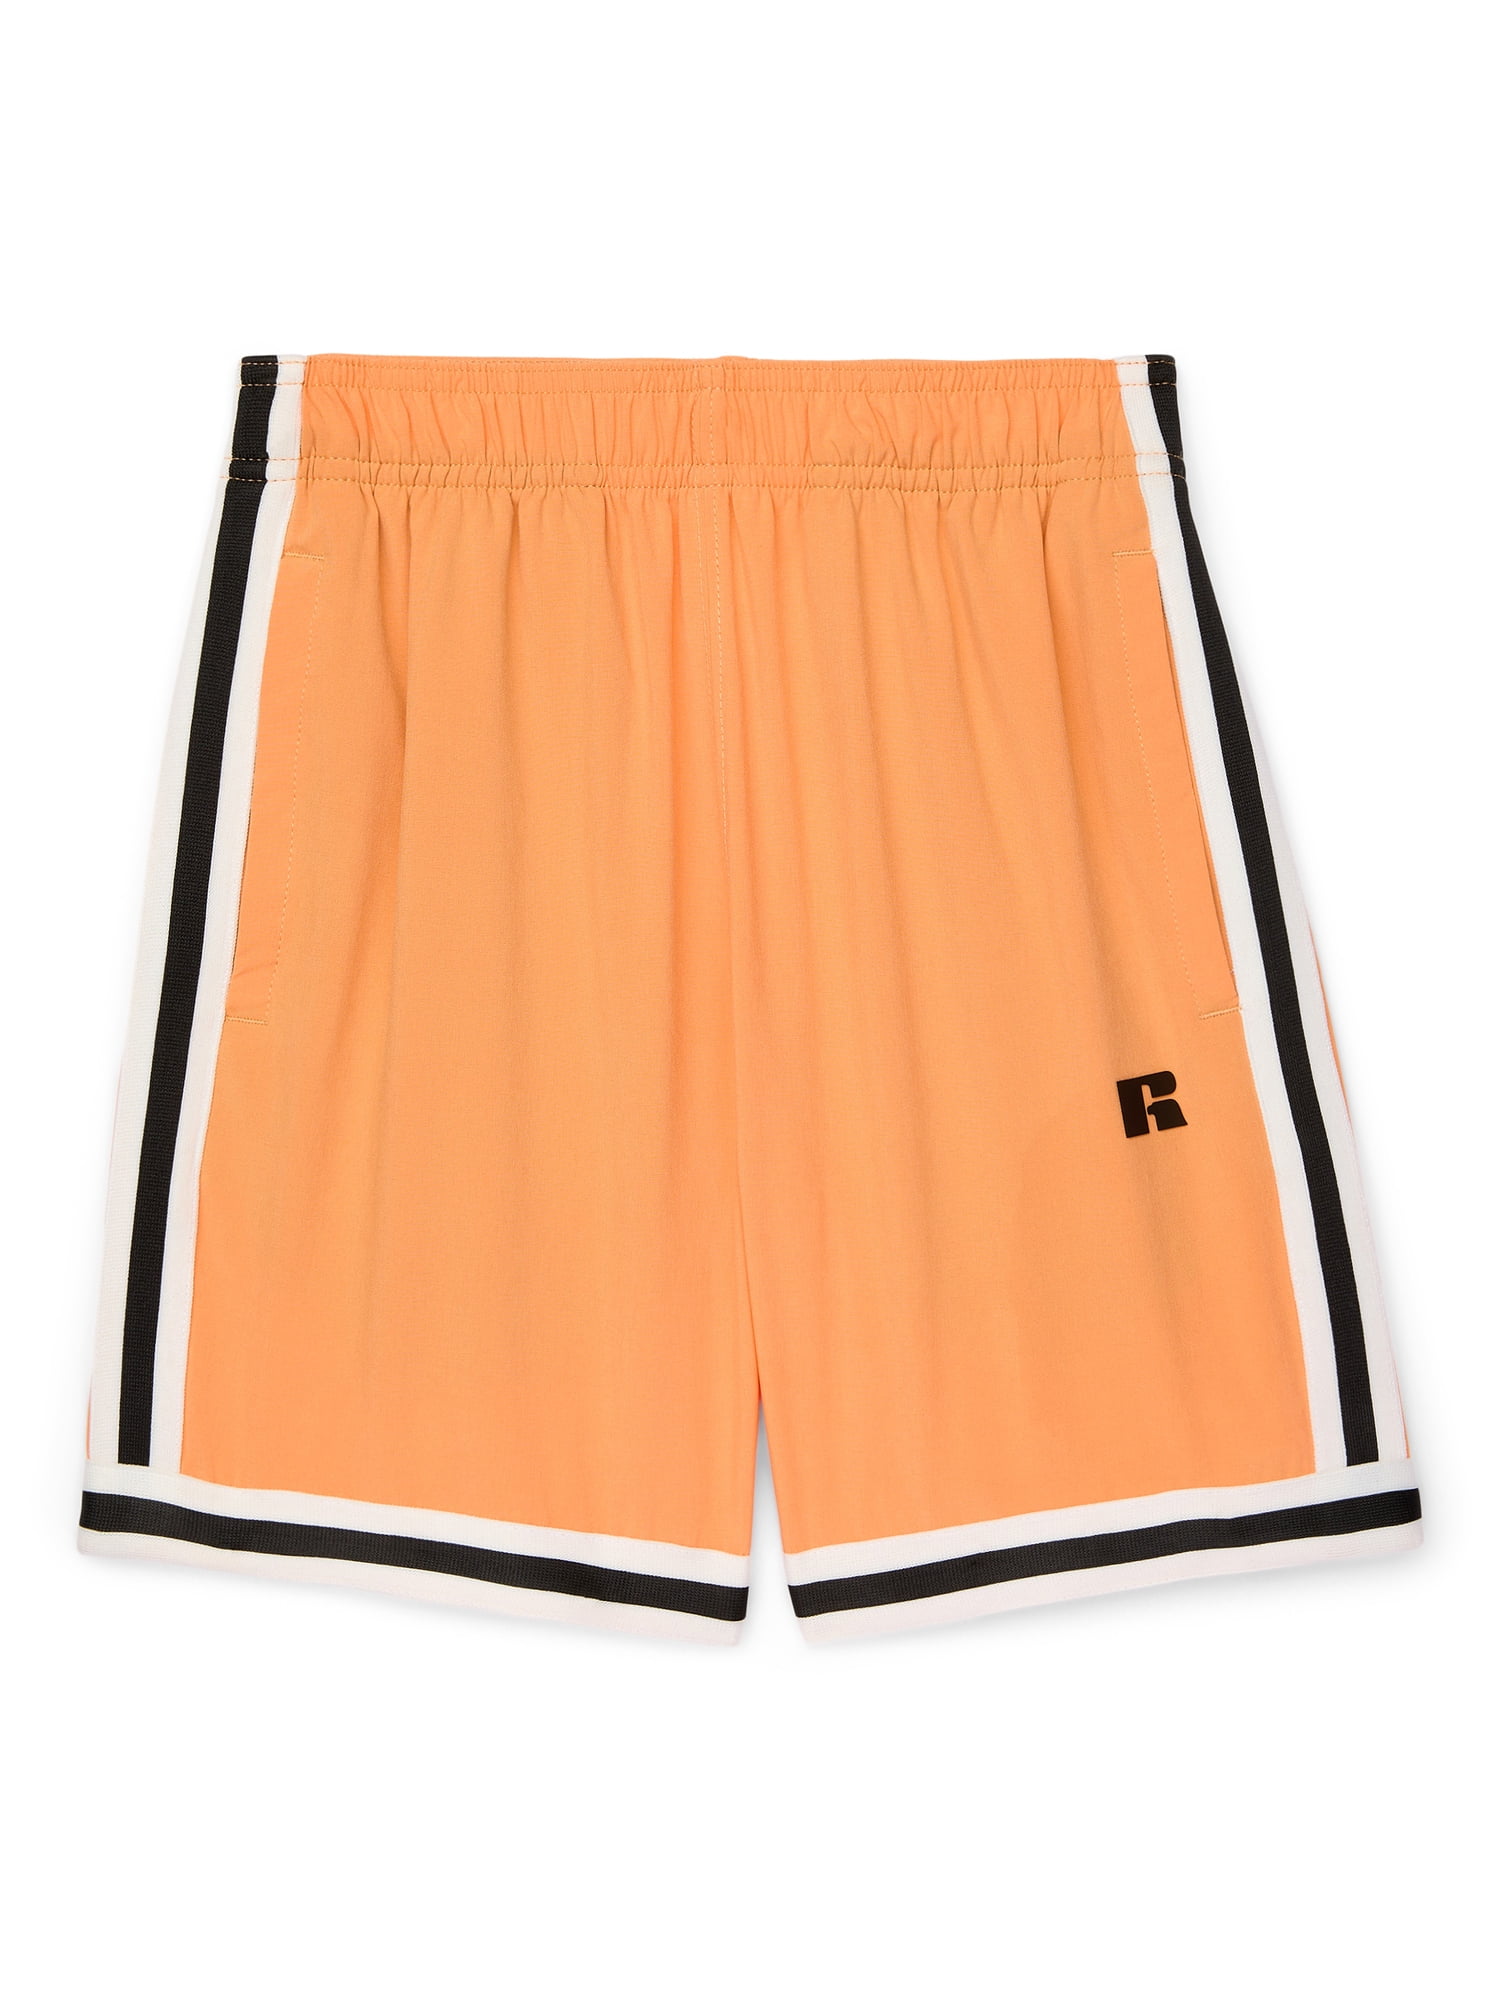 Russell Athletic Boys Active Woven Basketball Short, Sizes 4-18 & Husky ...